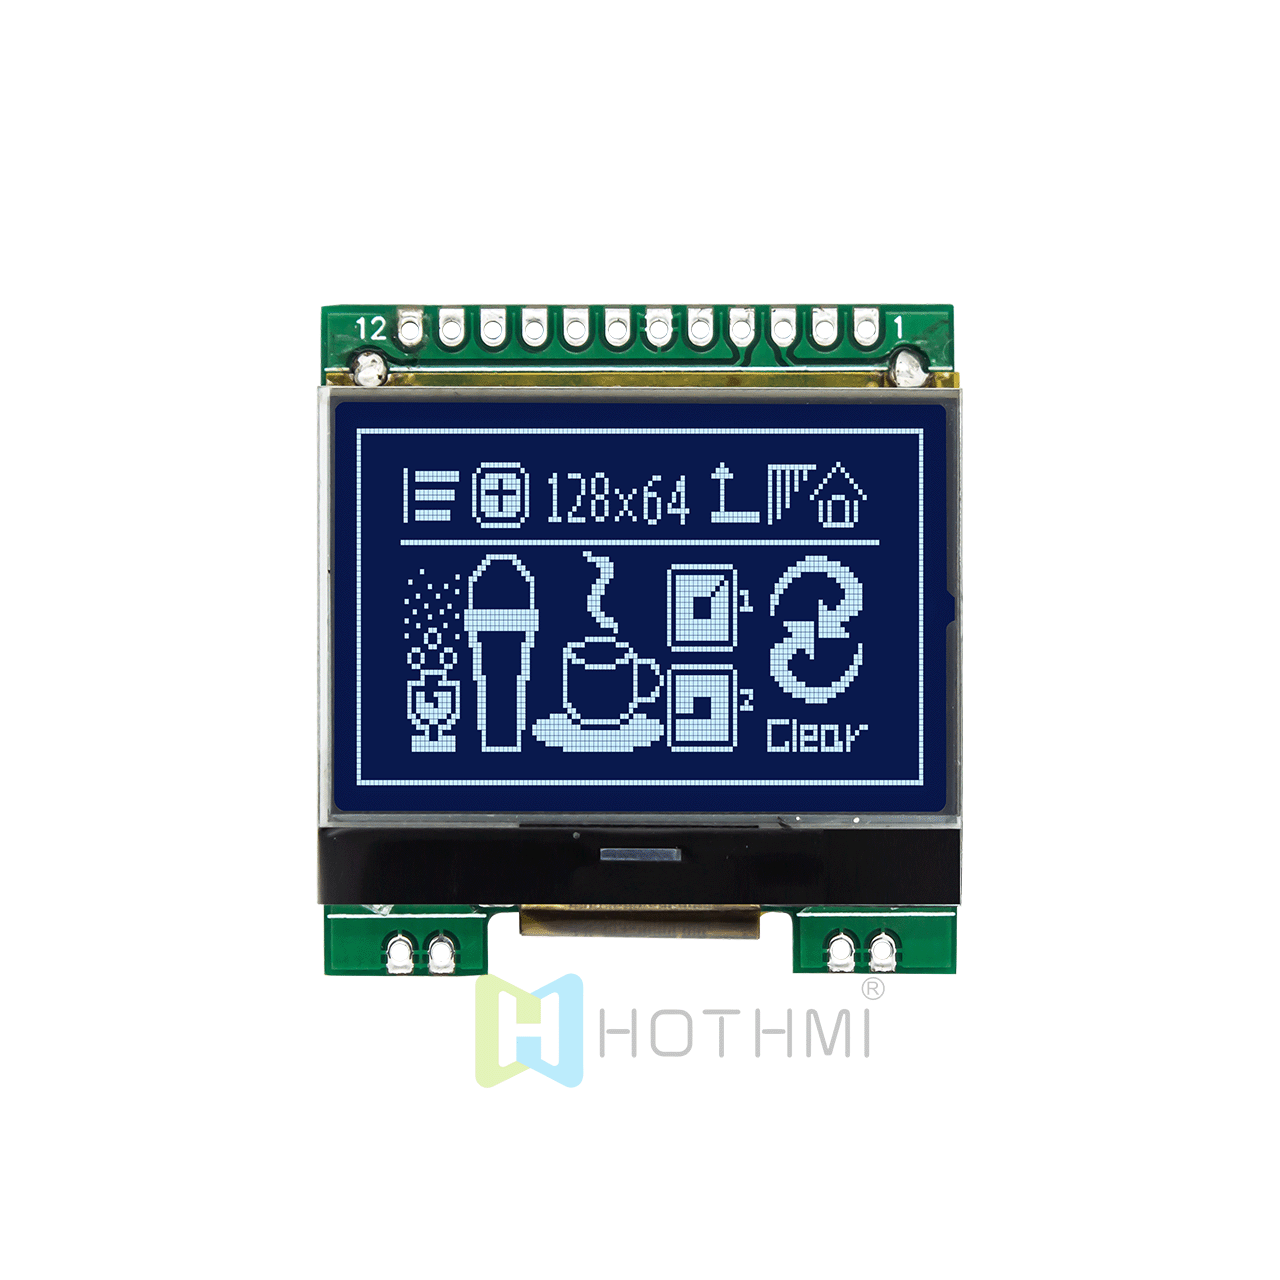 1.7"LCD12864 LCD screen/LCM128x64 graphic dot matrix module/white text on black background/multiple language fonts/1.7 inches/DFSTN negative display